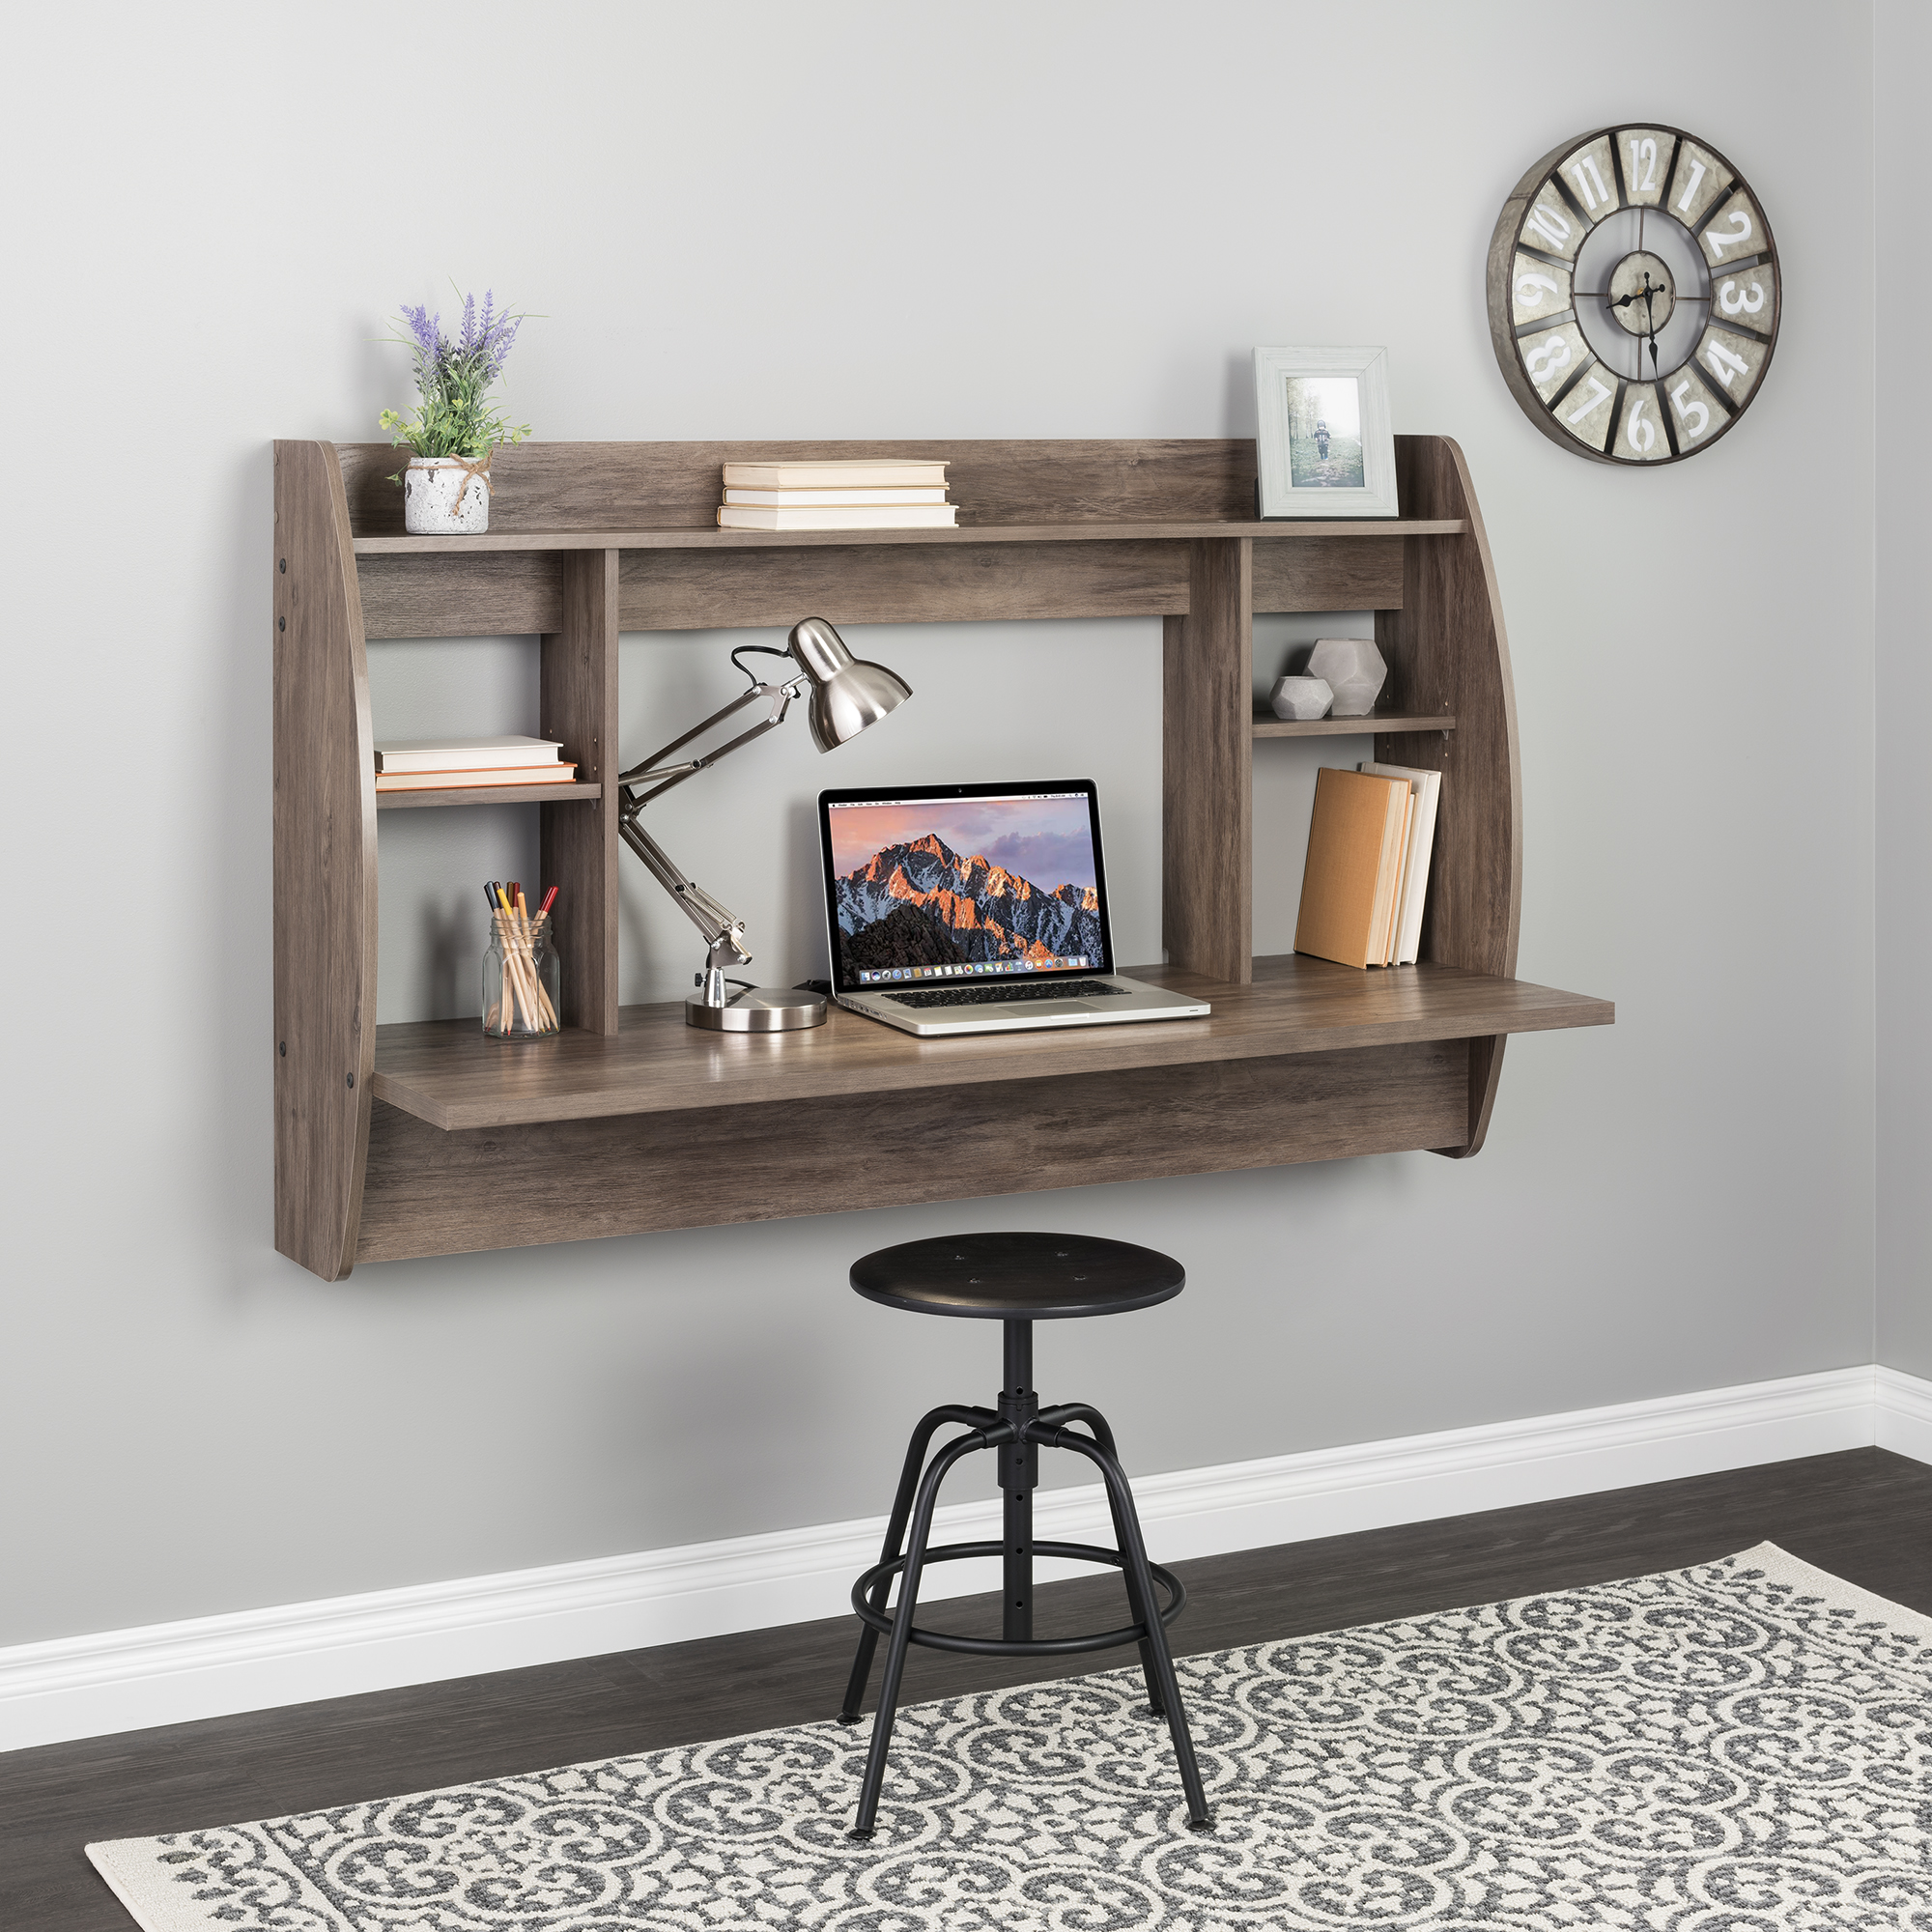 Prepac Home Office Modern Workstation 58" Wide Floating Desk, Drifted Gray - image 1 of 7